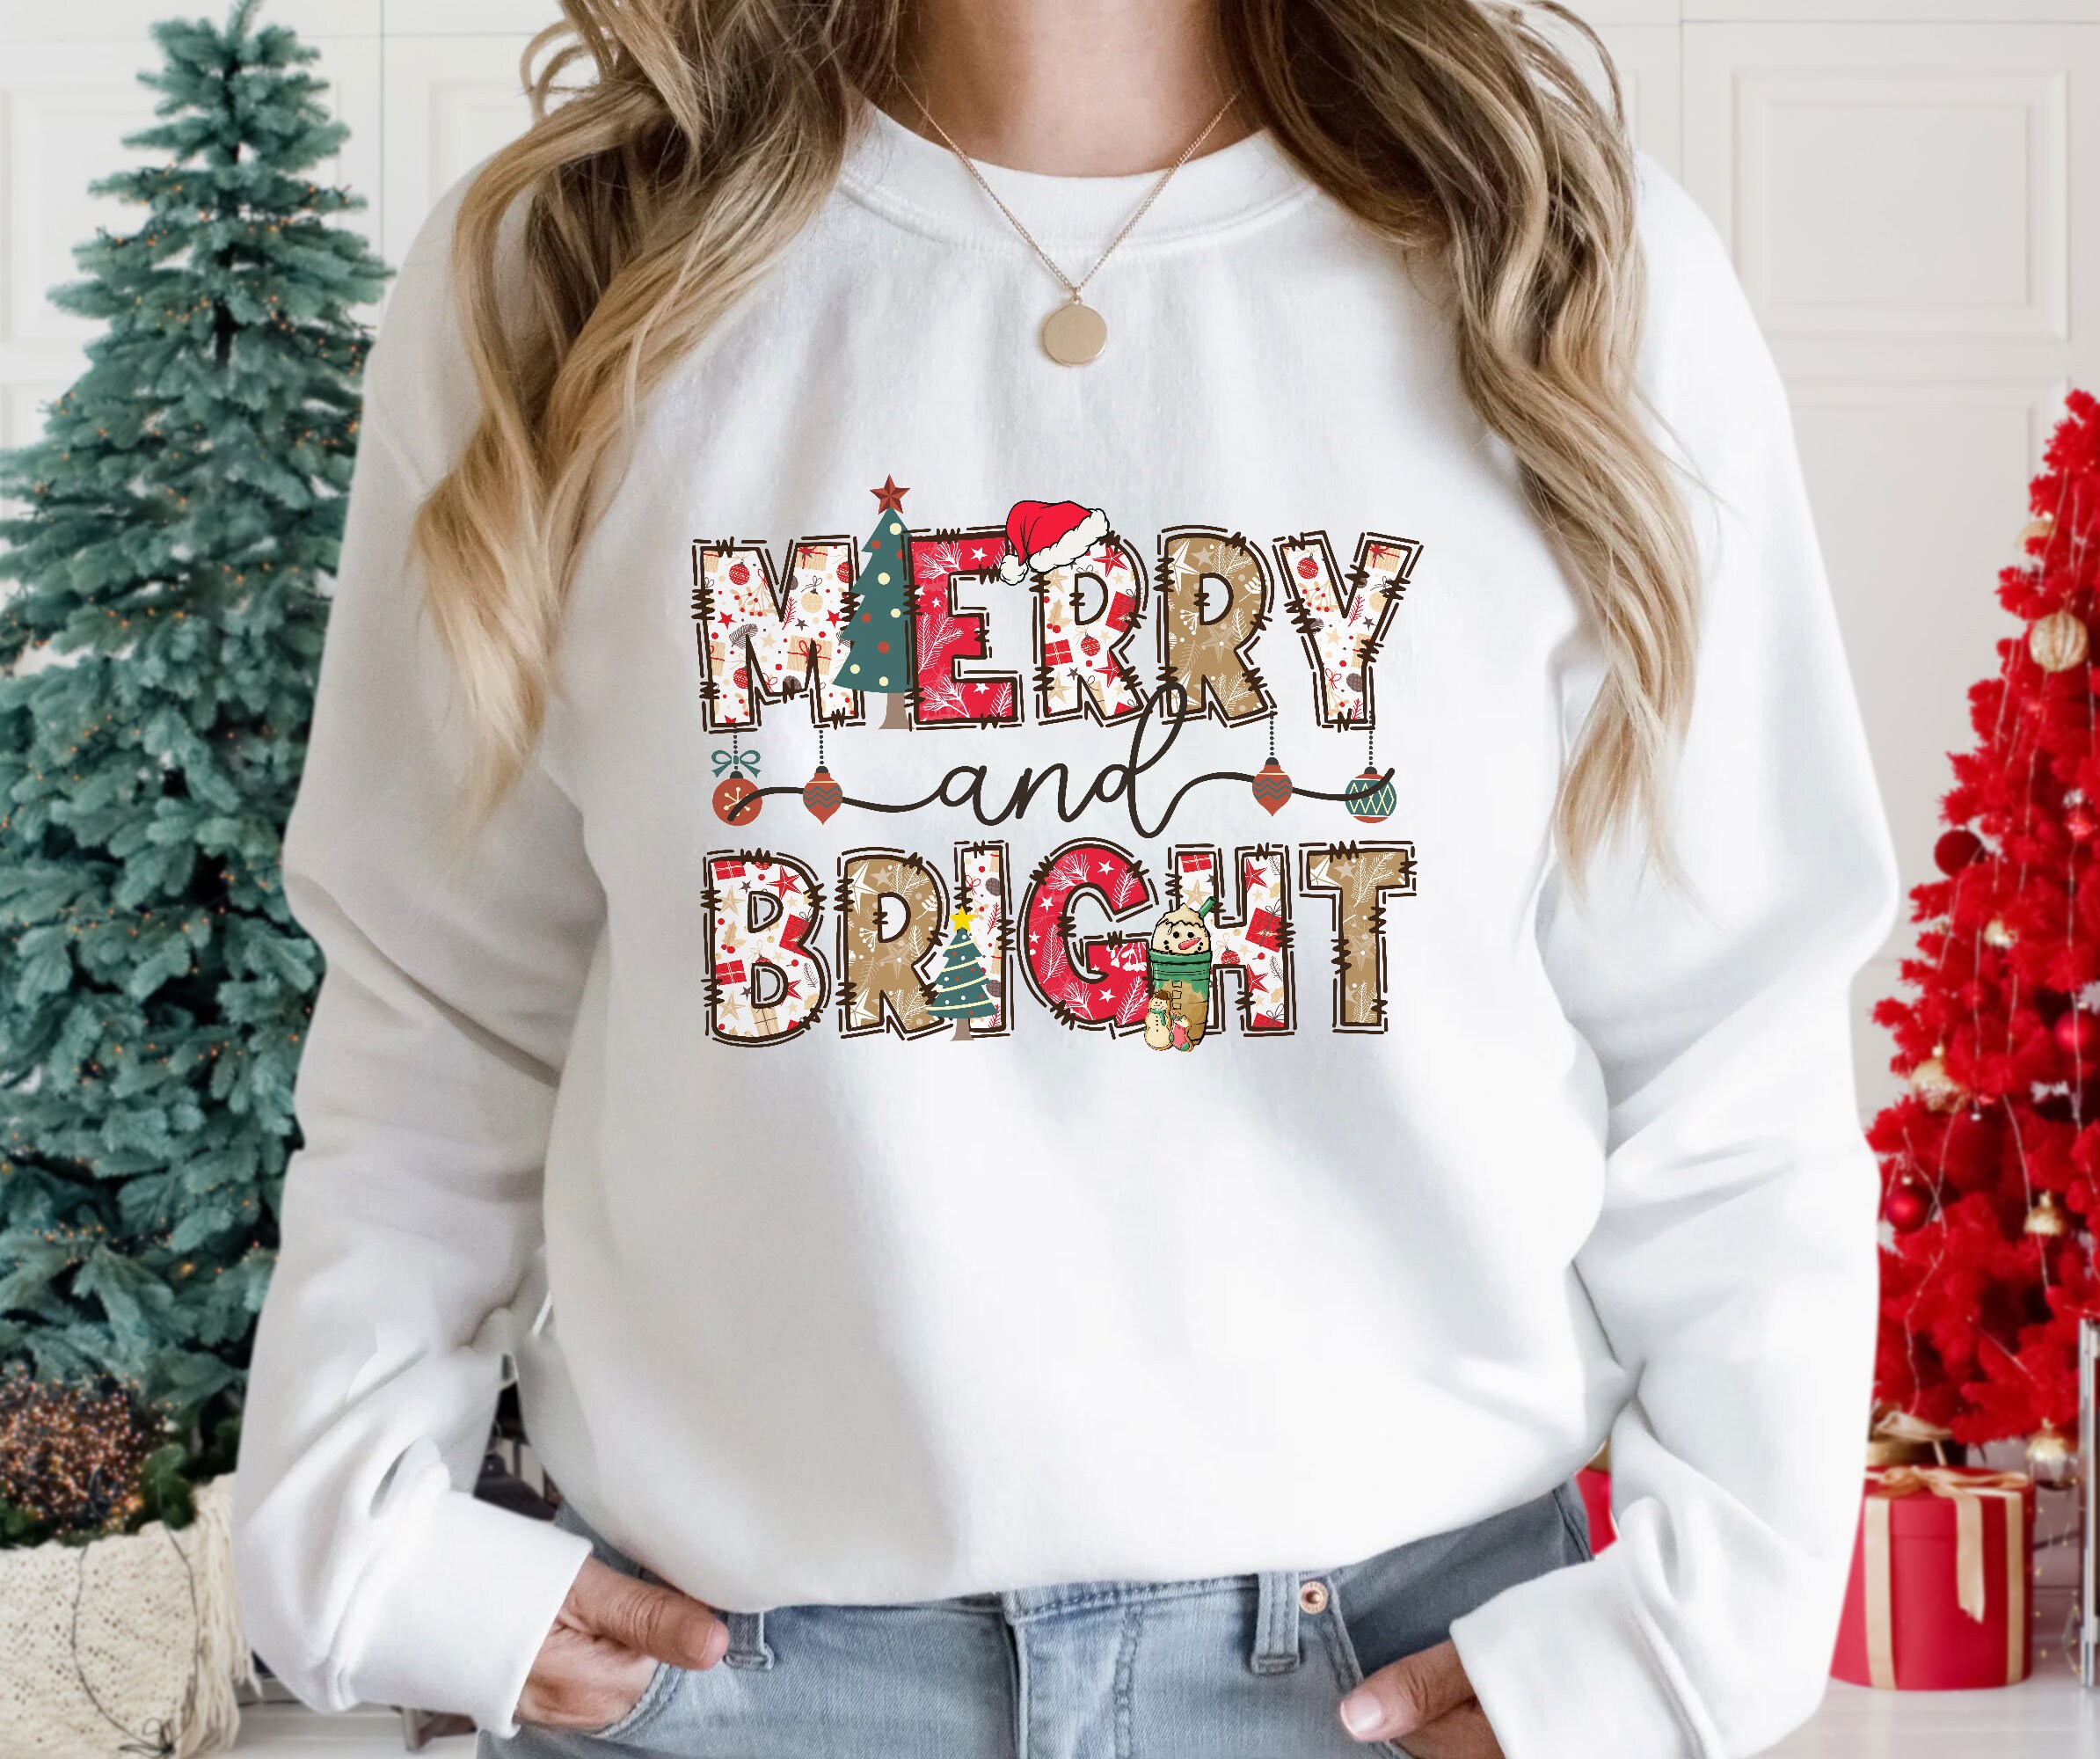 Discover Merry And Bright T-Shirt, Cute Christmas Light T-shirt, Friends And Family Holiday T-shirt